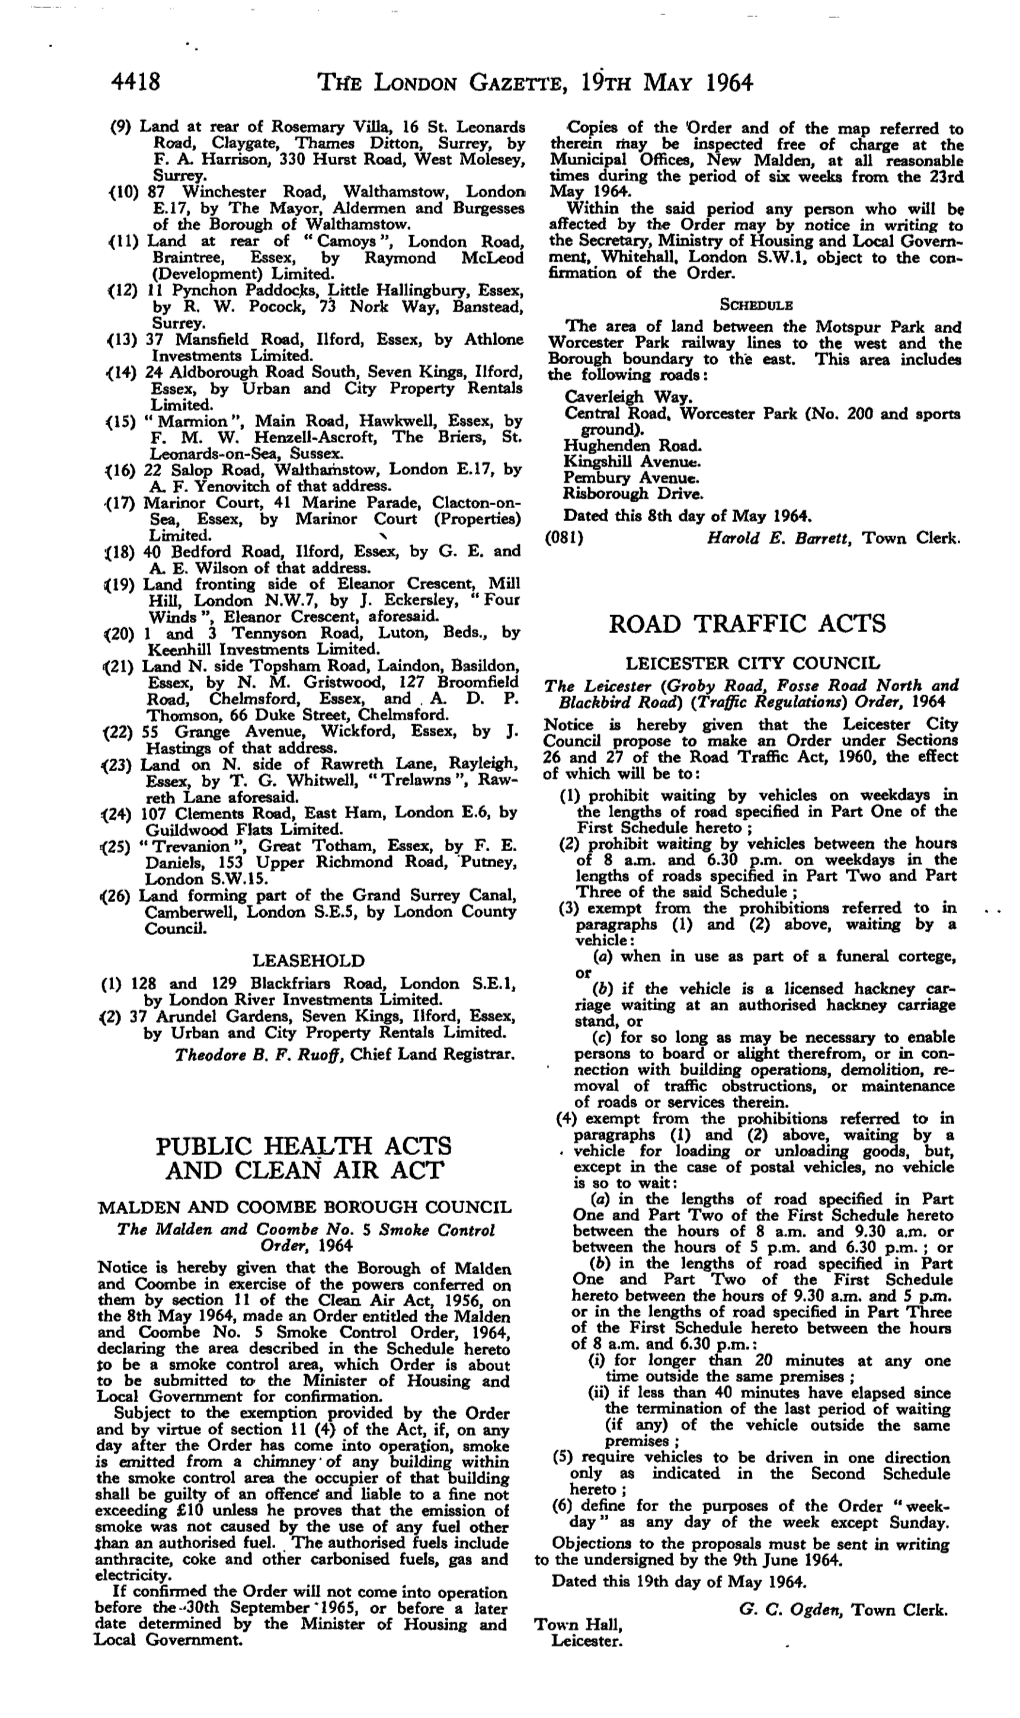 THE LONDON GAZETTE, 19Ra MAY 1964 PUBLIC HEALTH ACTS AND